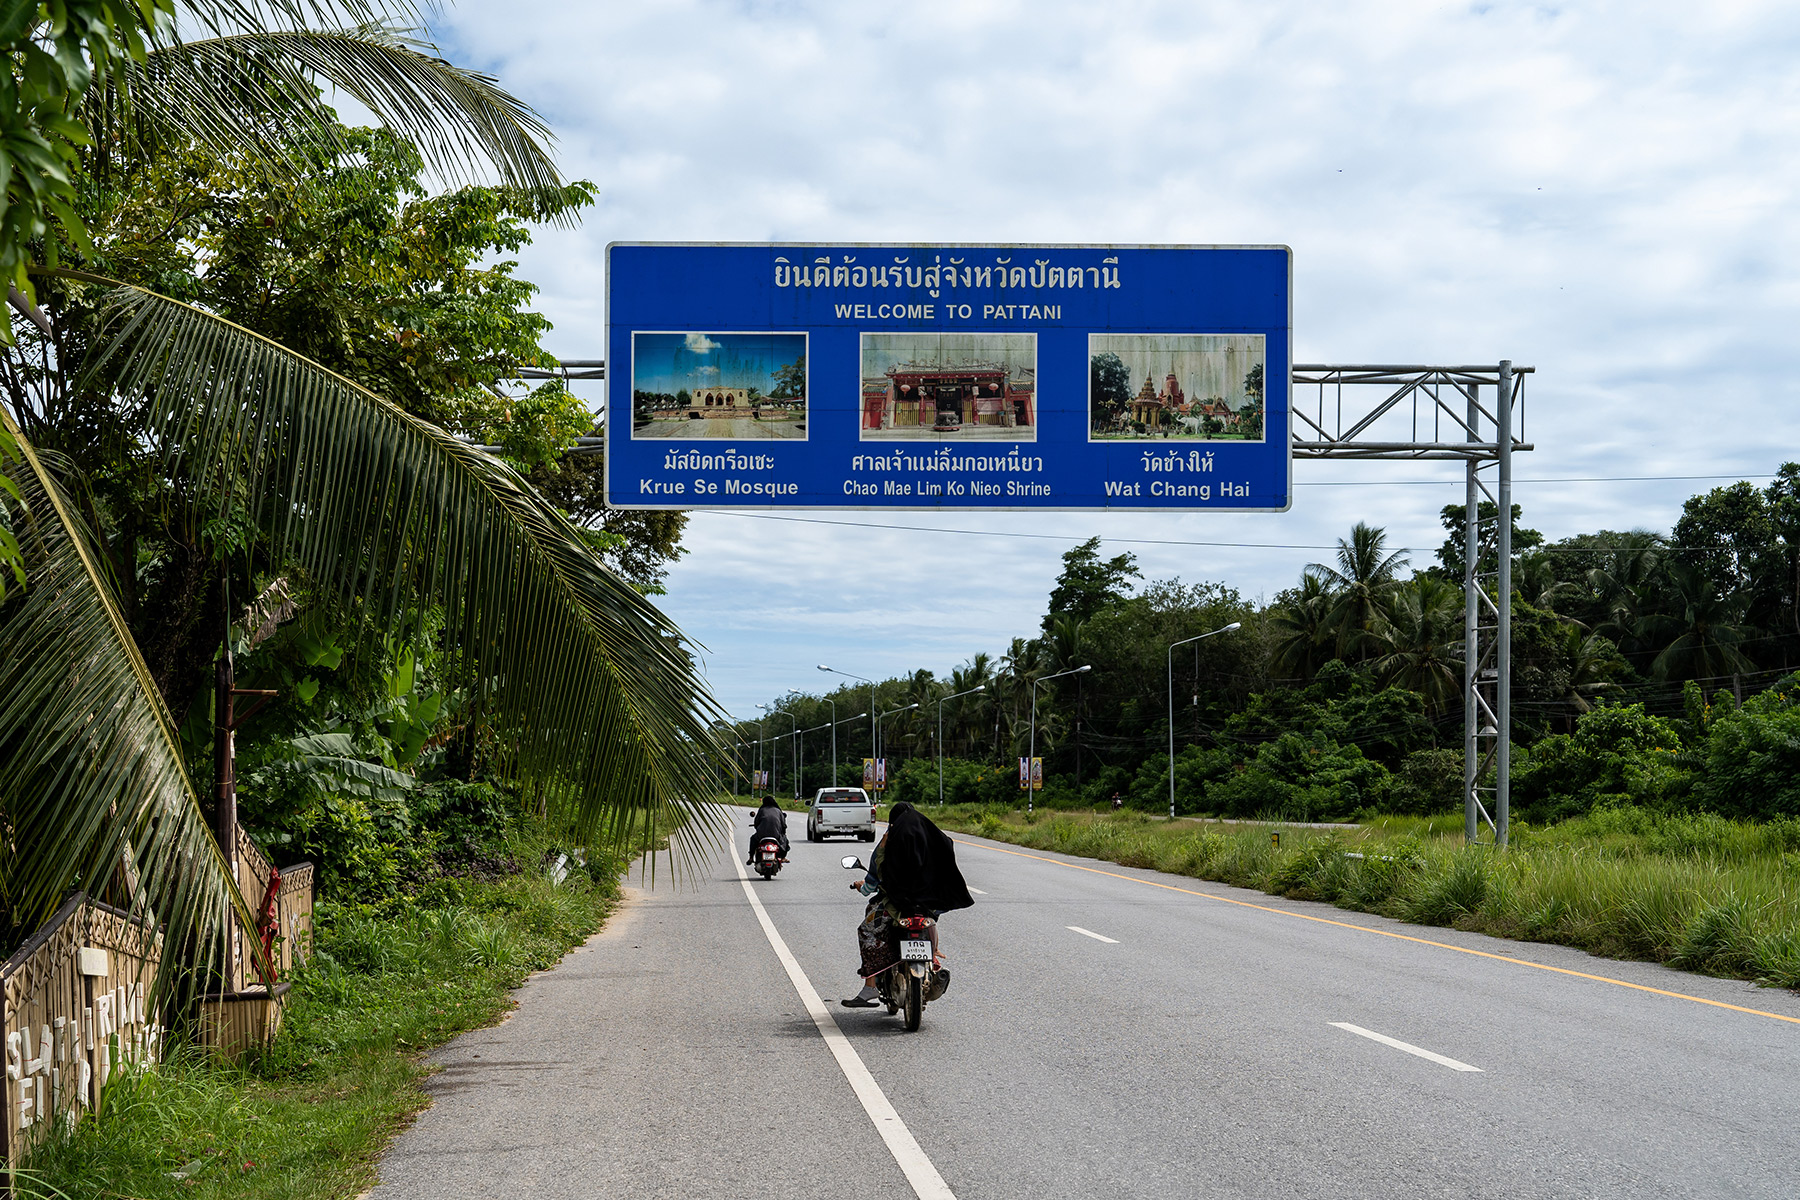 A road sign welcoming motorists to Pattani. People ride motorbikes and drive cars under the sign.